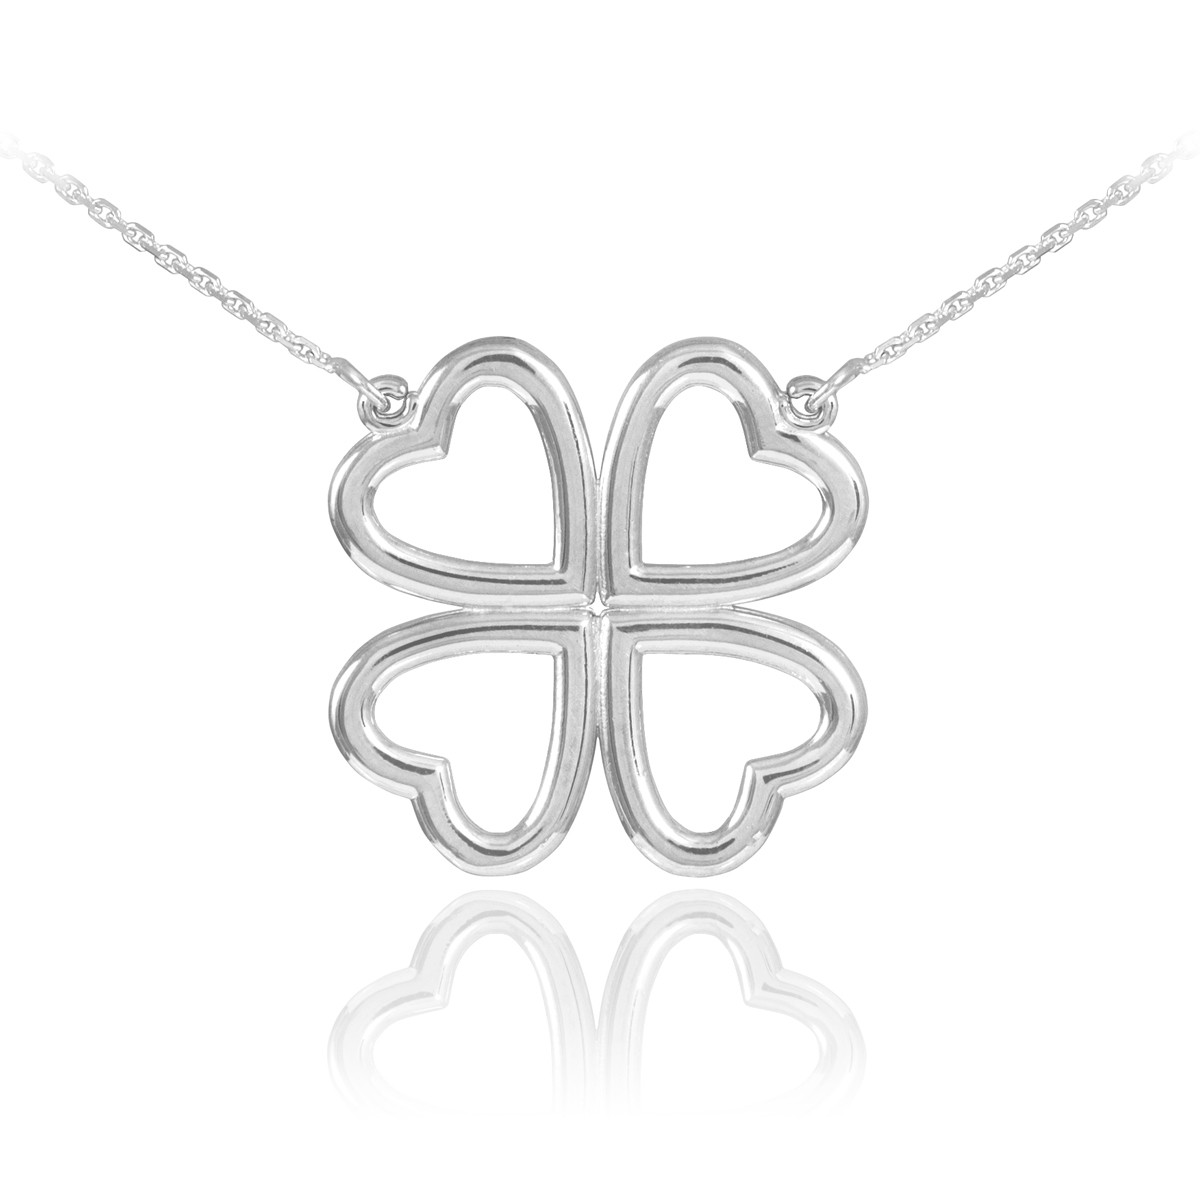 Lucky Clover Necklace with Engraved Names in Silver - Talisa - Gifts Ideas